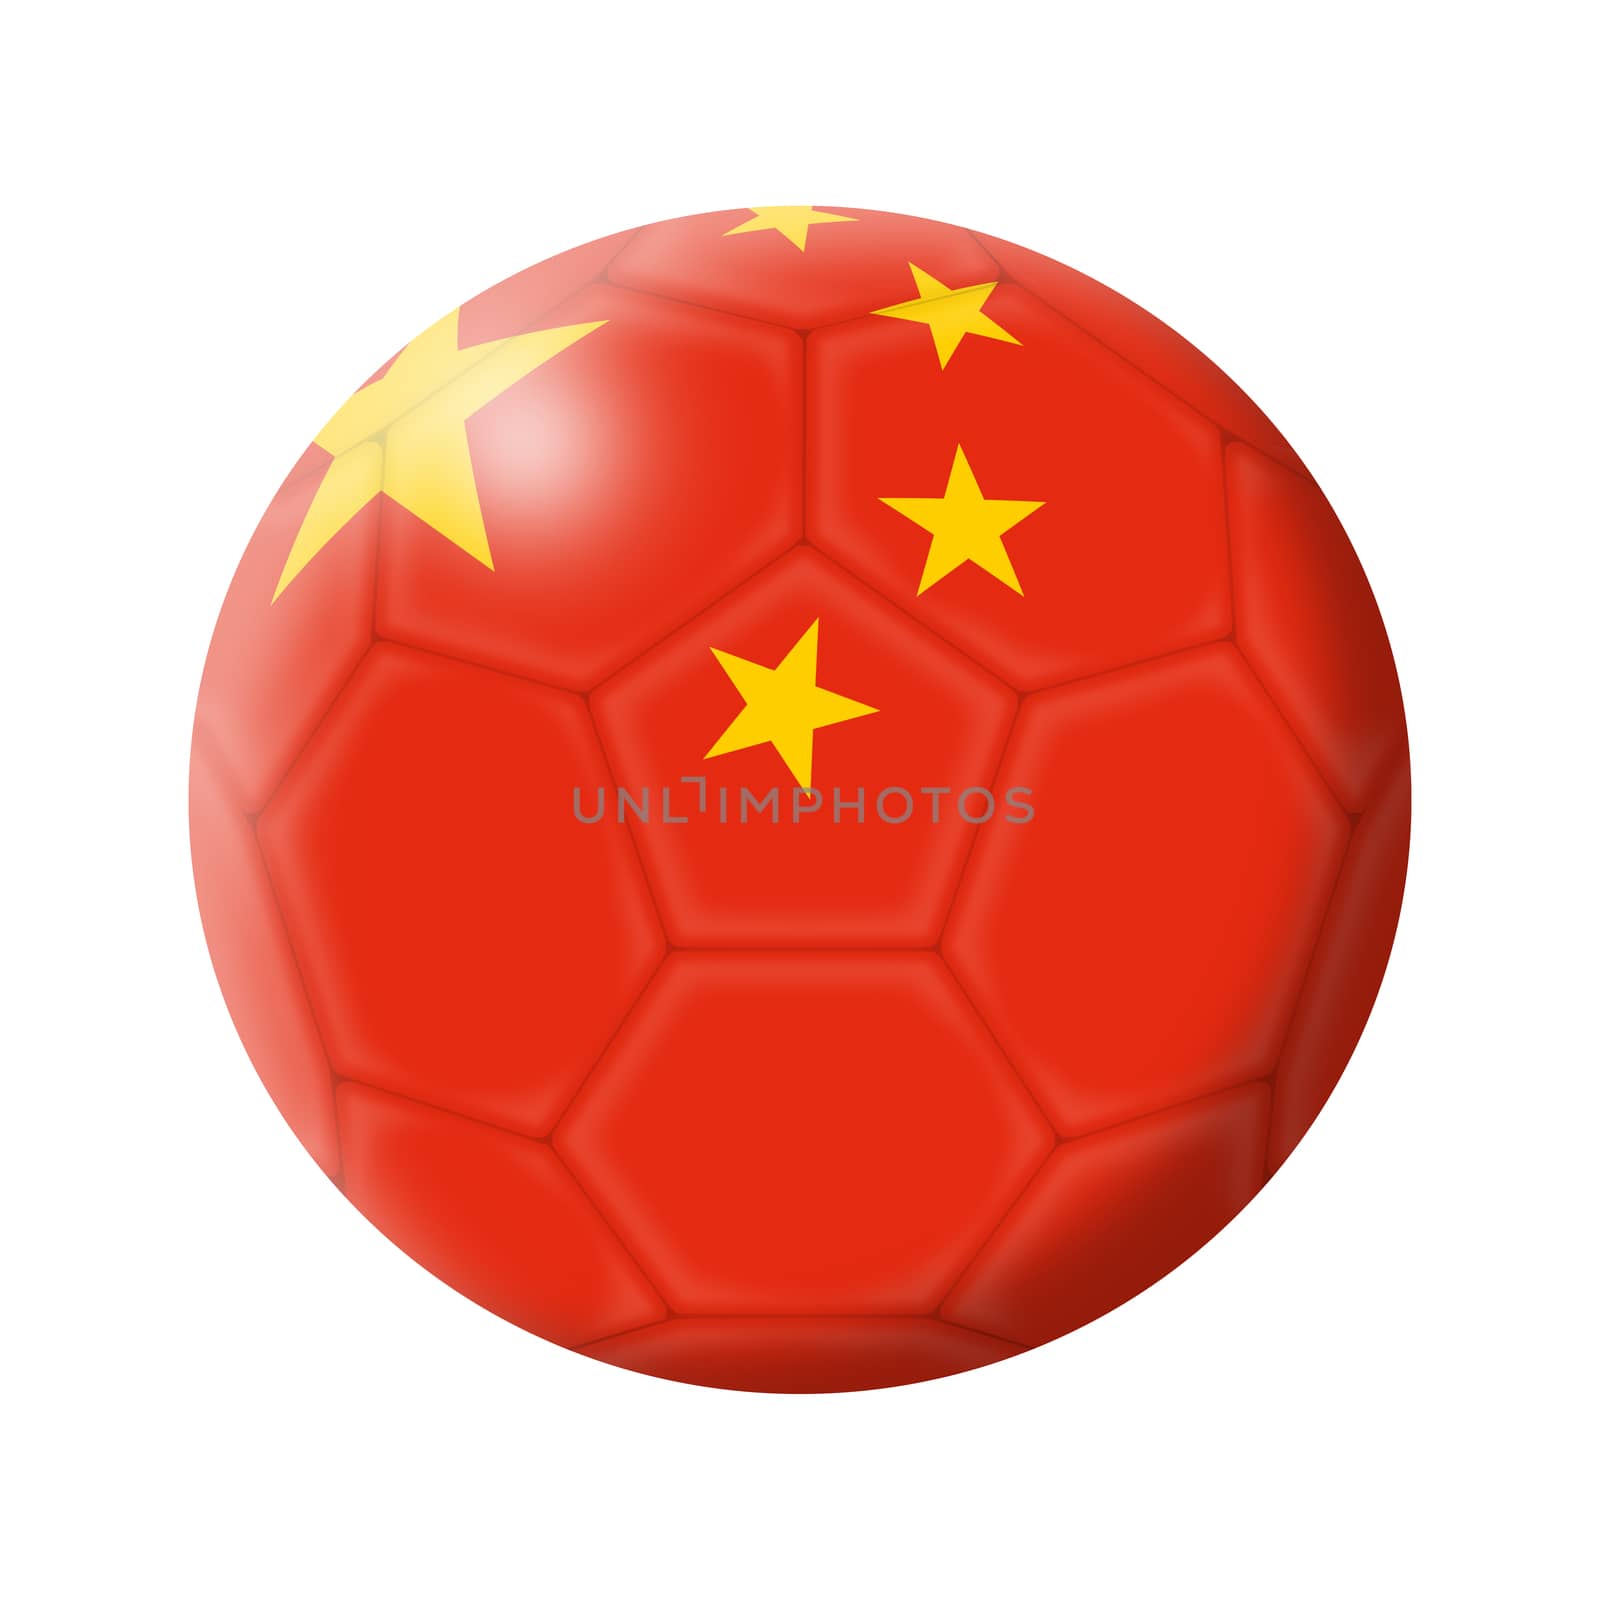 A Peoples Republic of China soccer ball football illustration isolated on white with clipping path